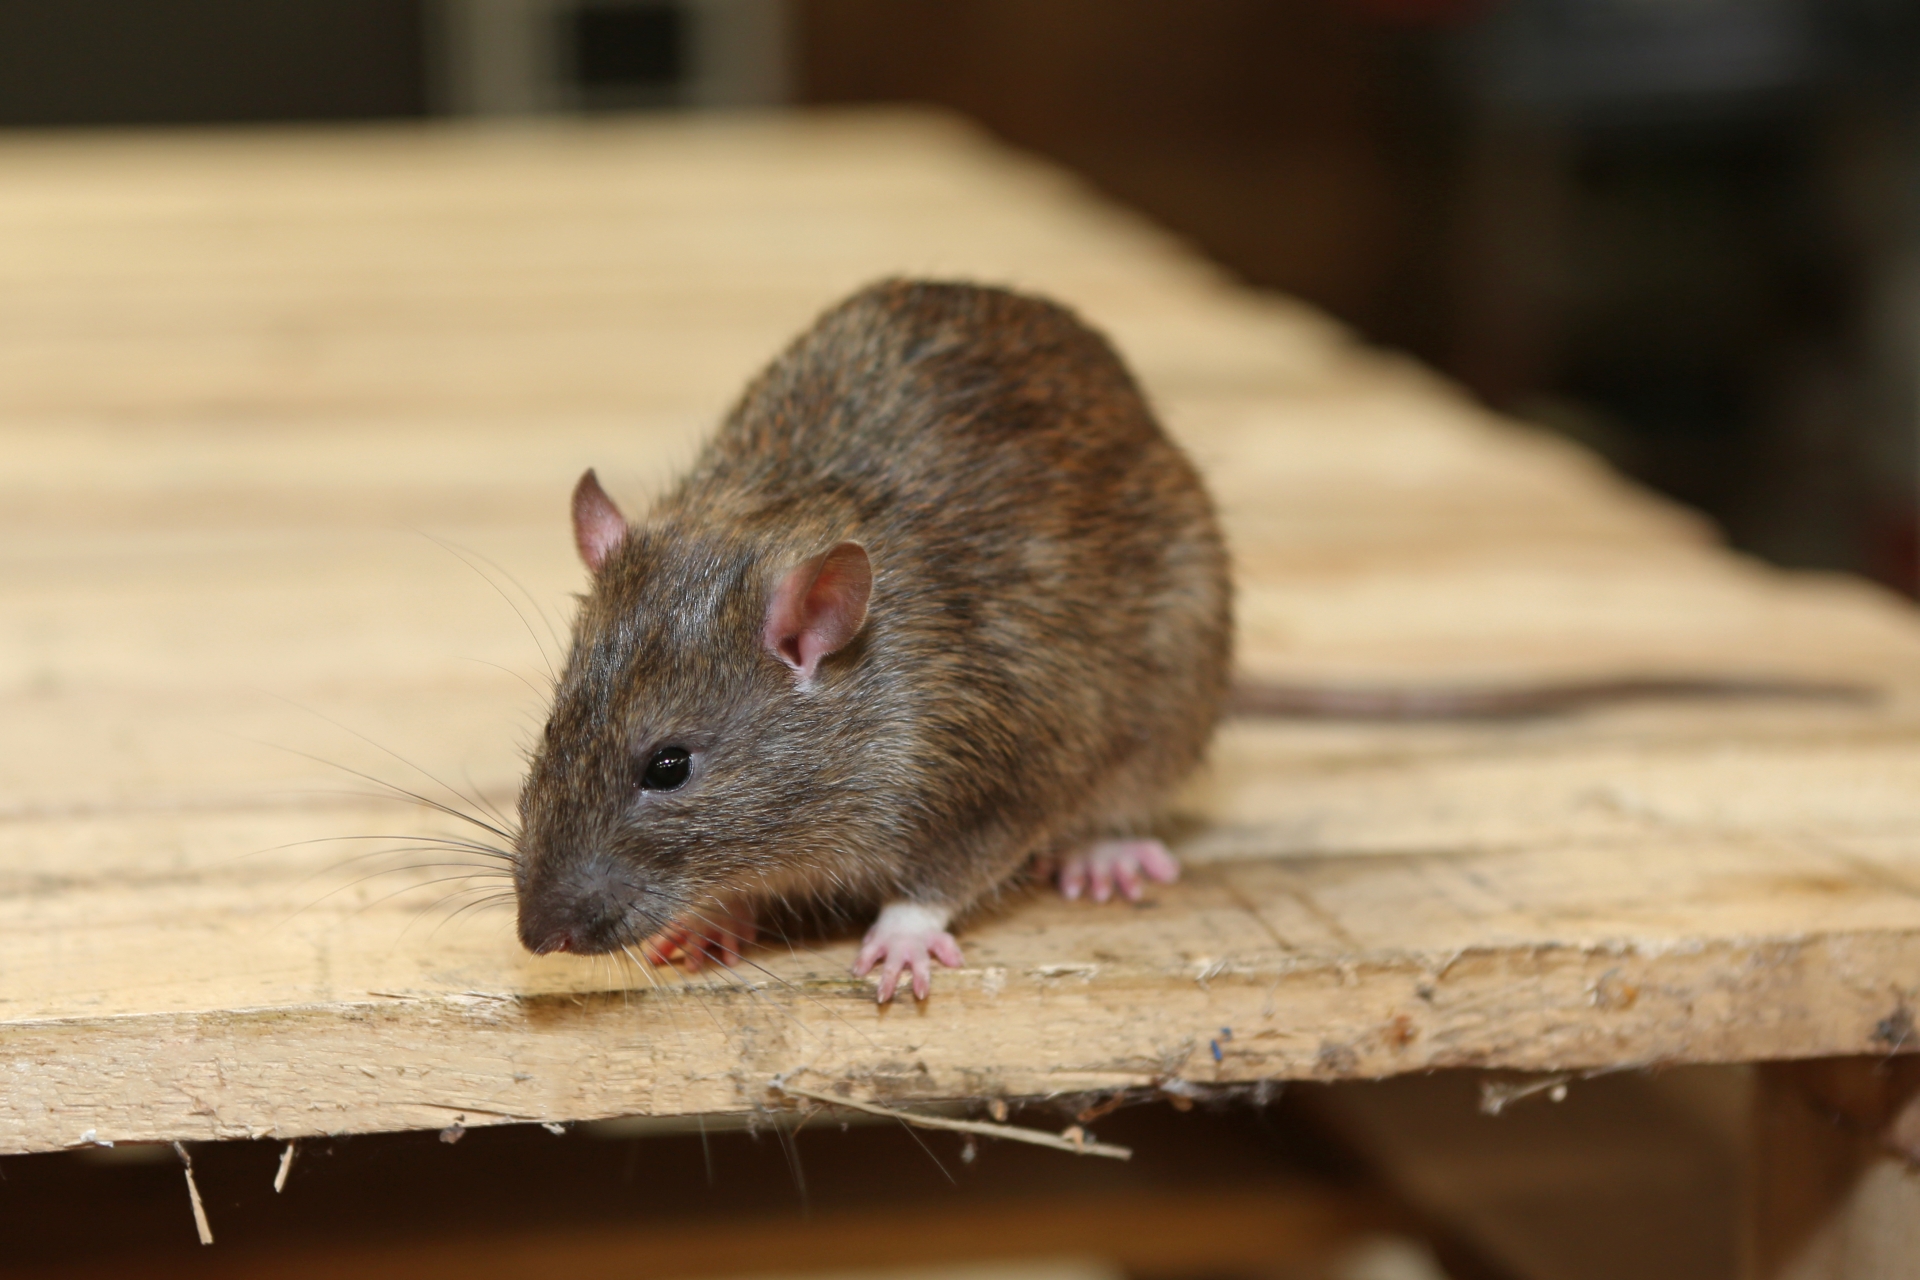 Rat Control, Pest Control in New Cross, New Cross Gate, SE14. Call Now 020 8166 9746